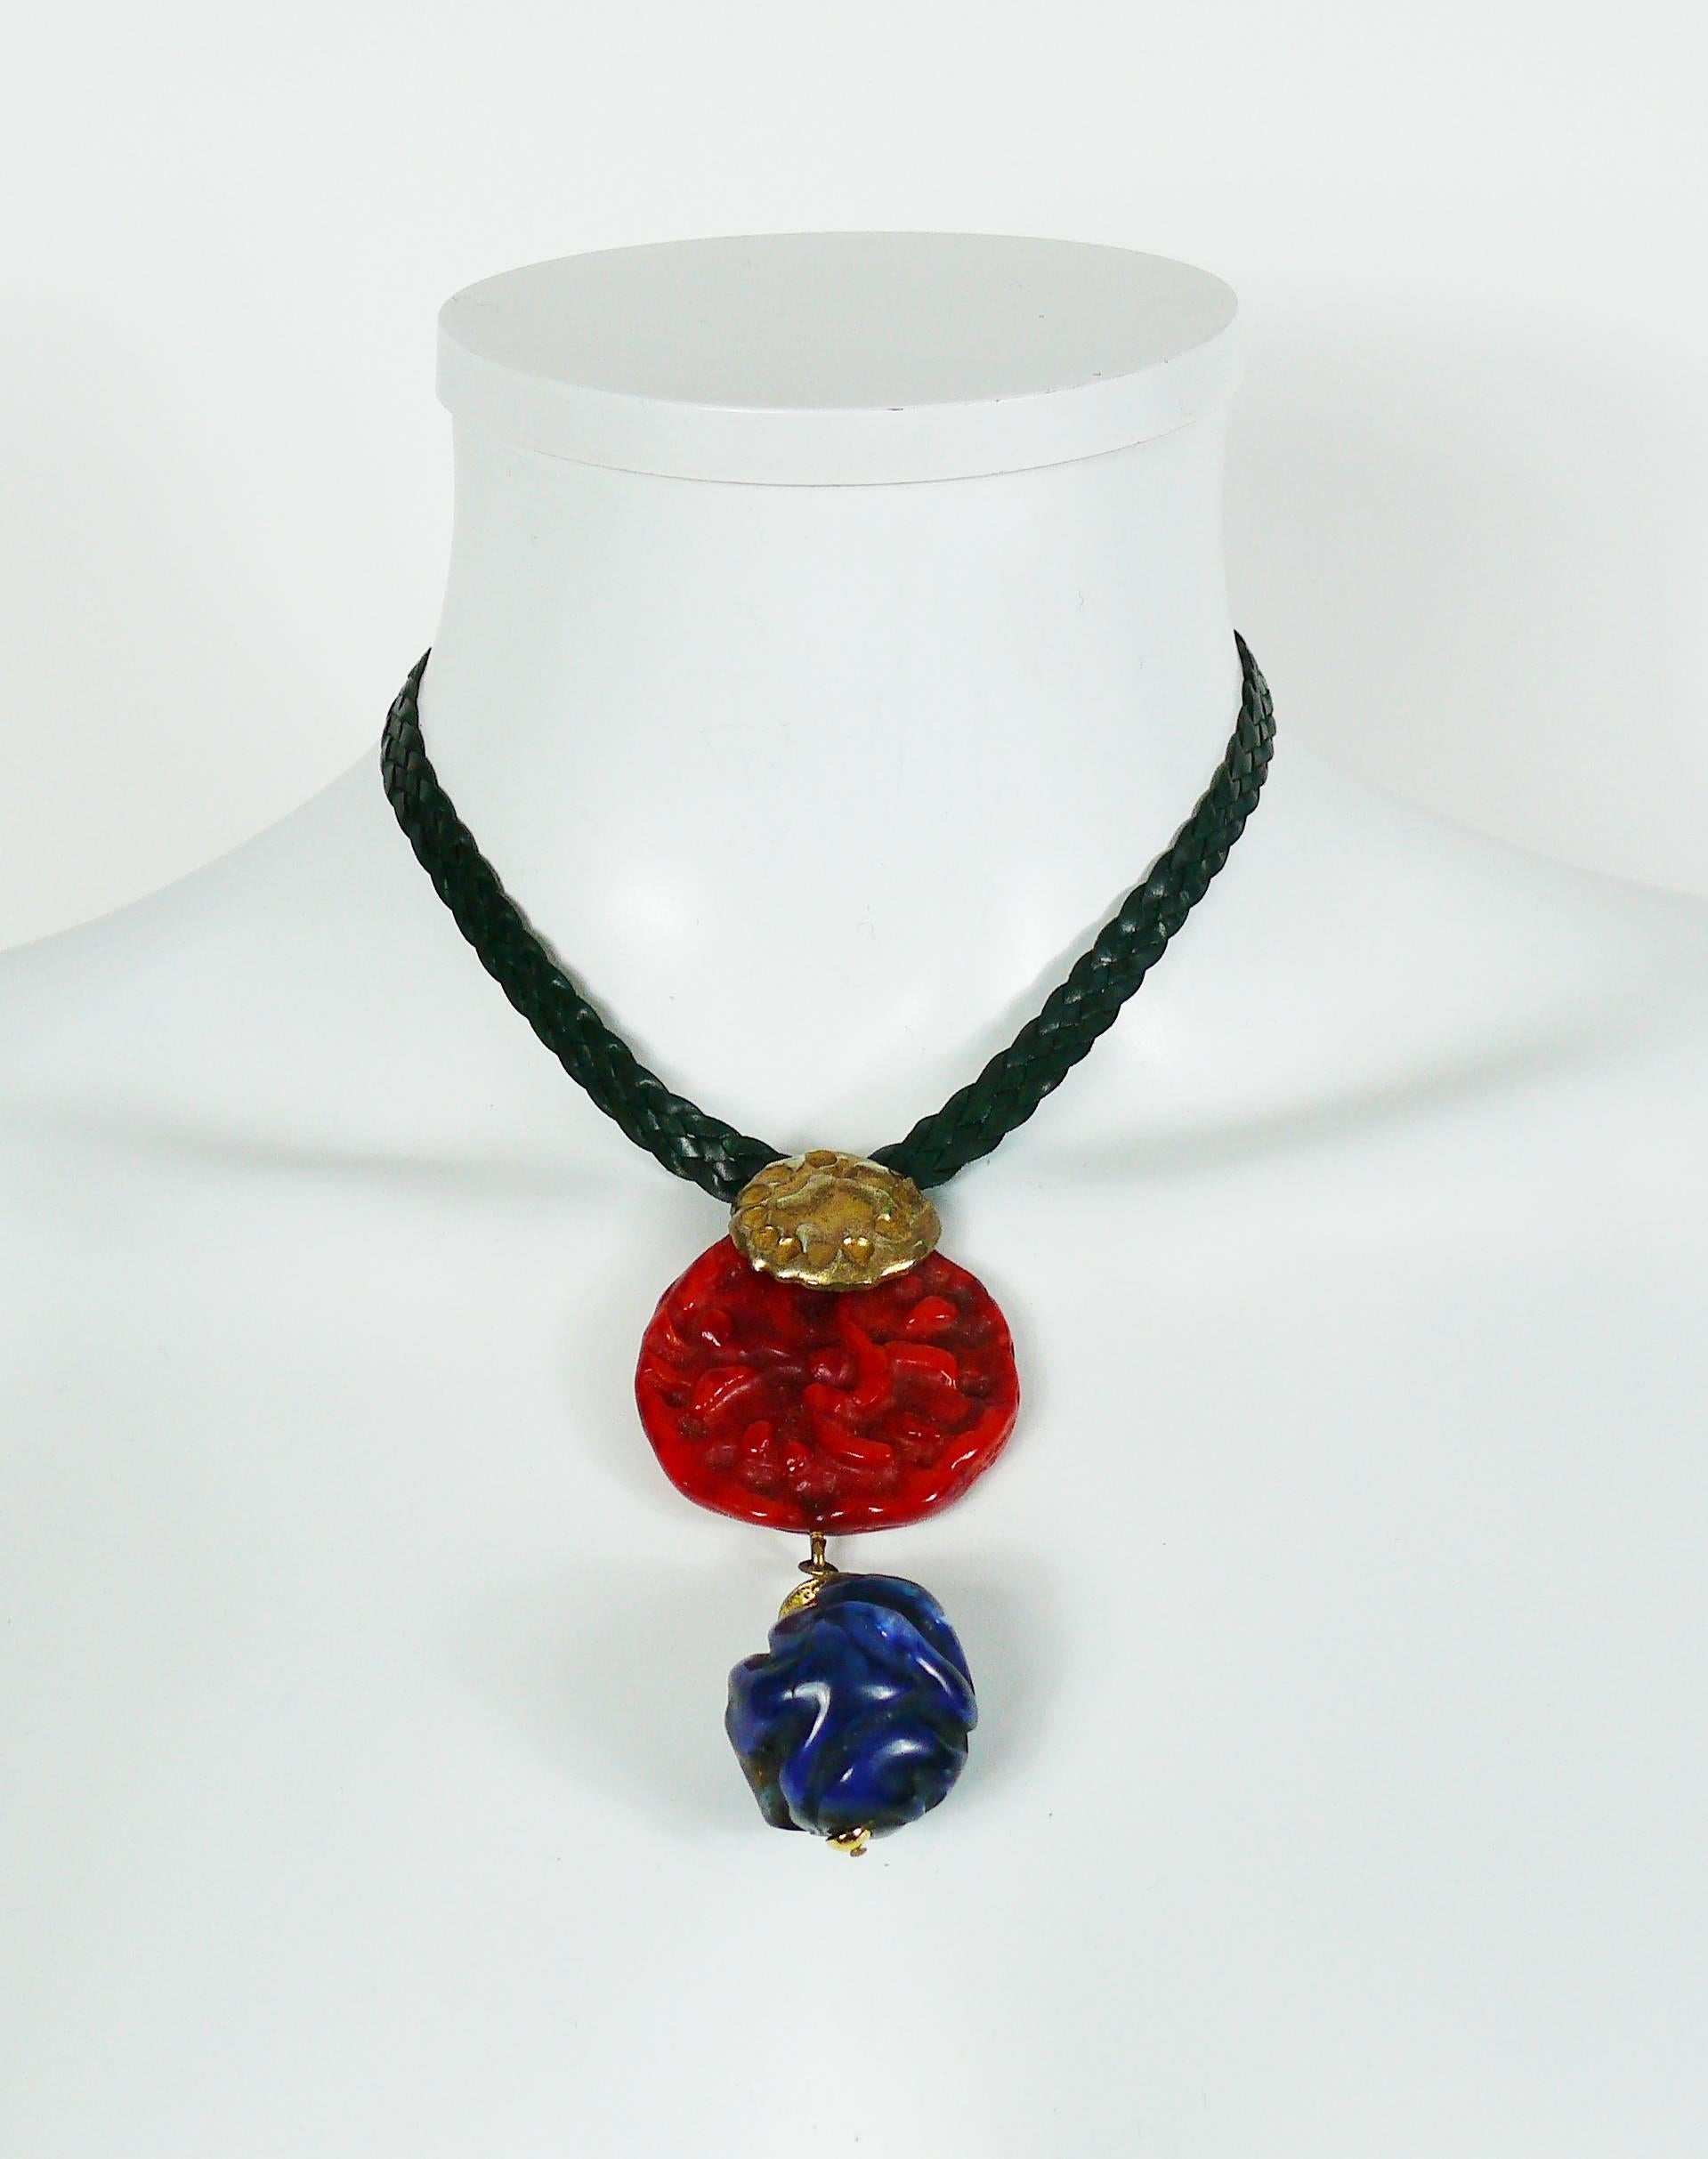 YVES SAINT LAURENT vintage Asisatic inspired necklace.

This necklace features a gorgeous pendant consisting of a gold toned textured coin, a large faux coral disc and a faux Lapis lazuli drop. Green leather strap.

Hook clasp closure.

Marked YVES